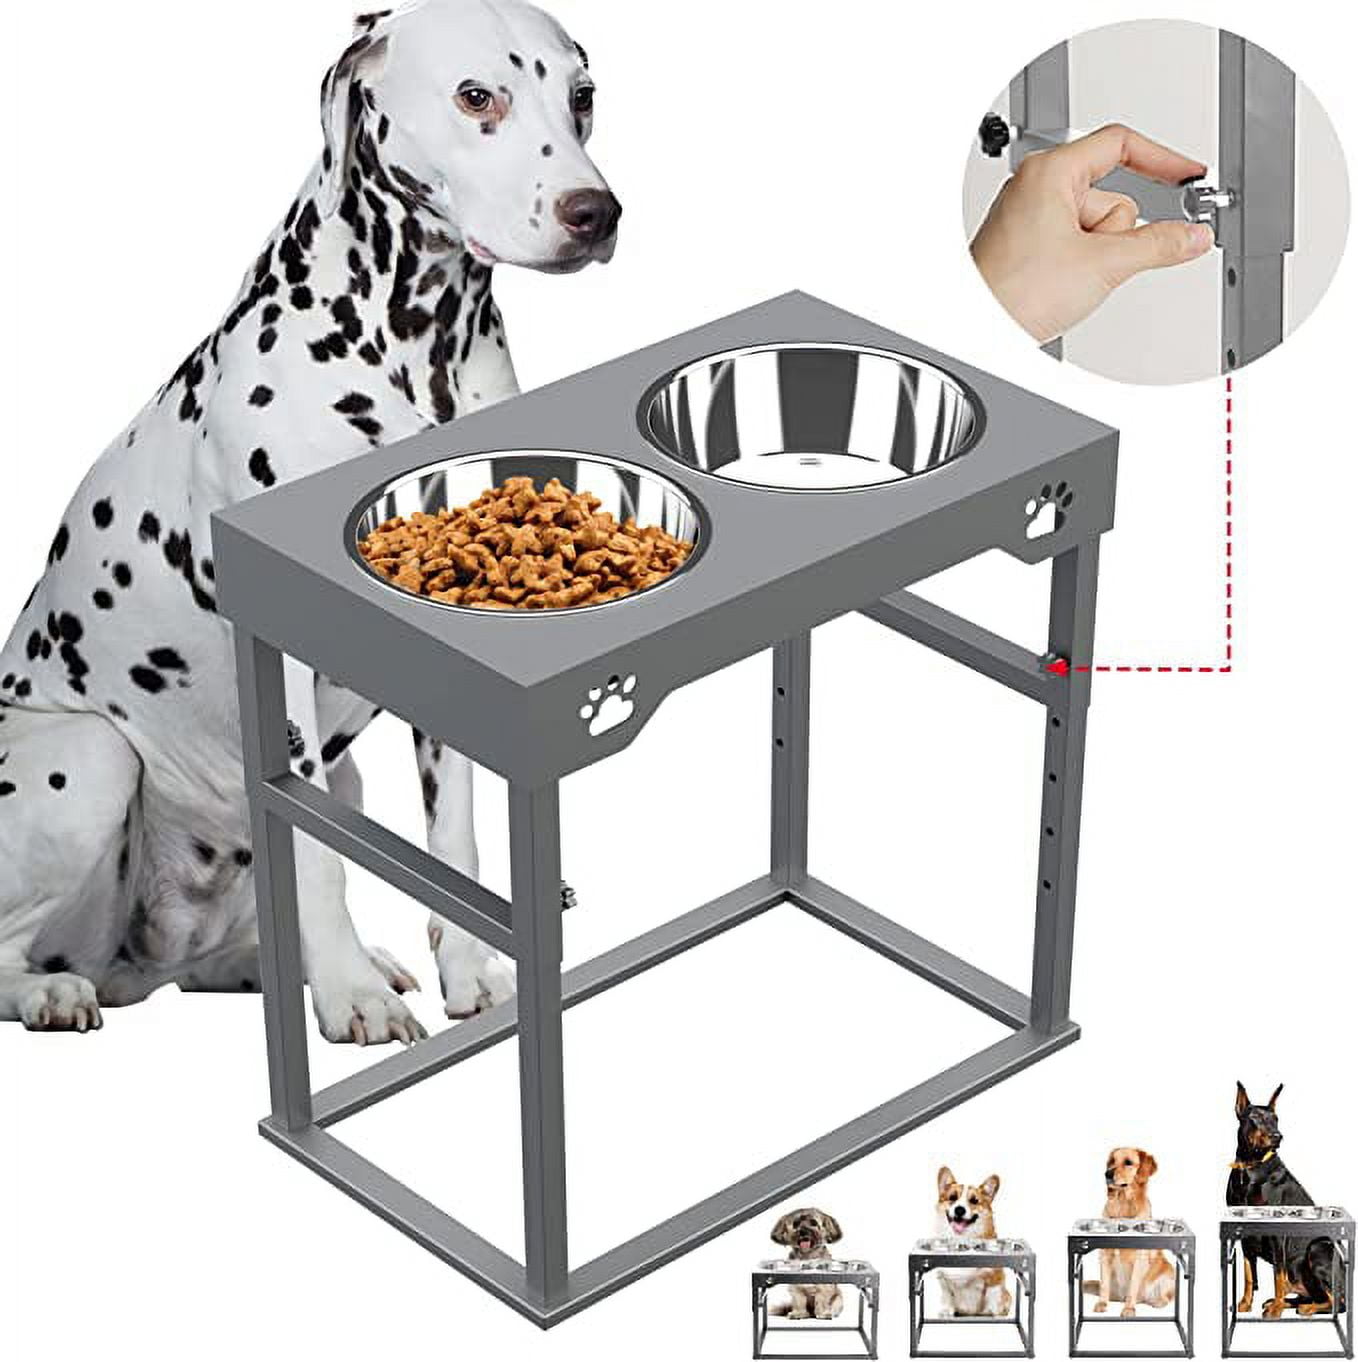 Sunmeyke Elevated Dog Bowl Stand, 8.8 Lb Weight Capacity, Adjustable 8  Heights, Stainless Steel, Reduces Joint Stress, Easy to Use and Adjust